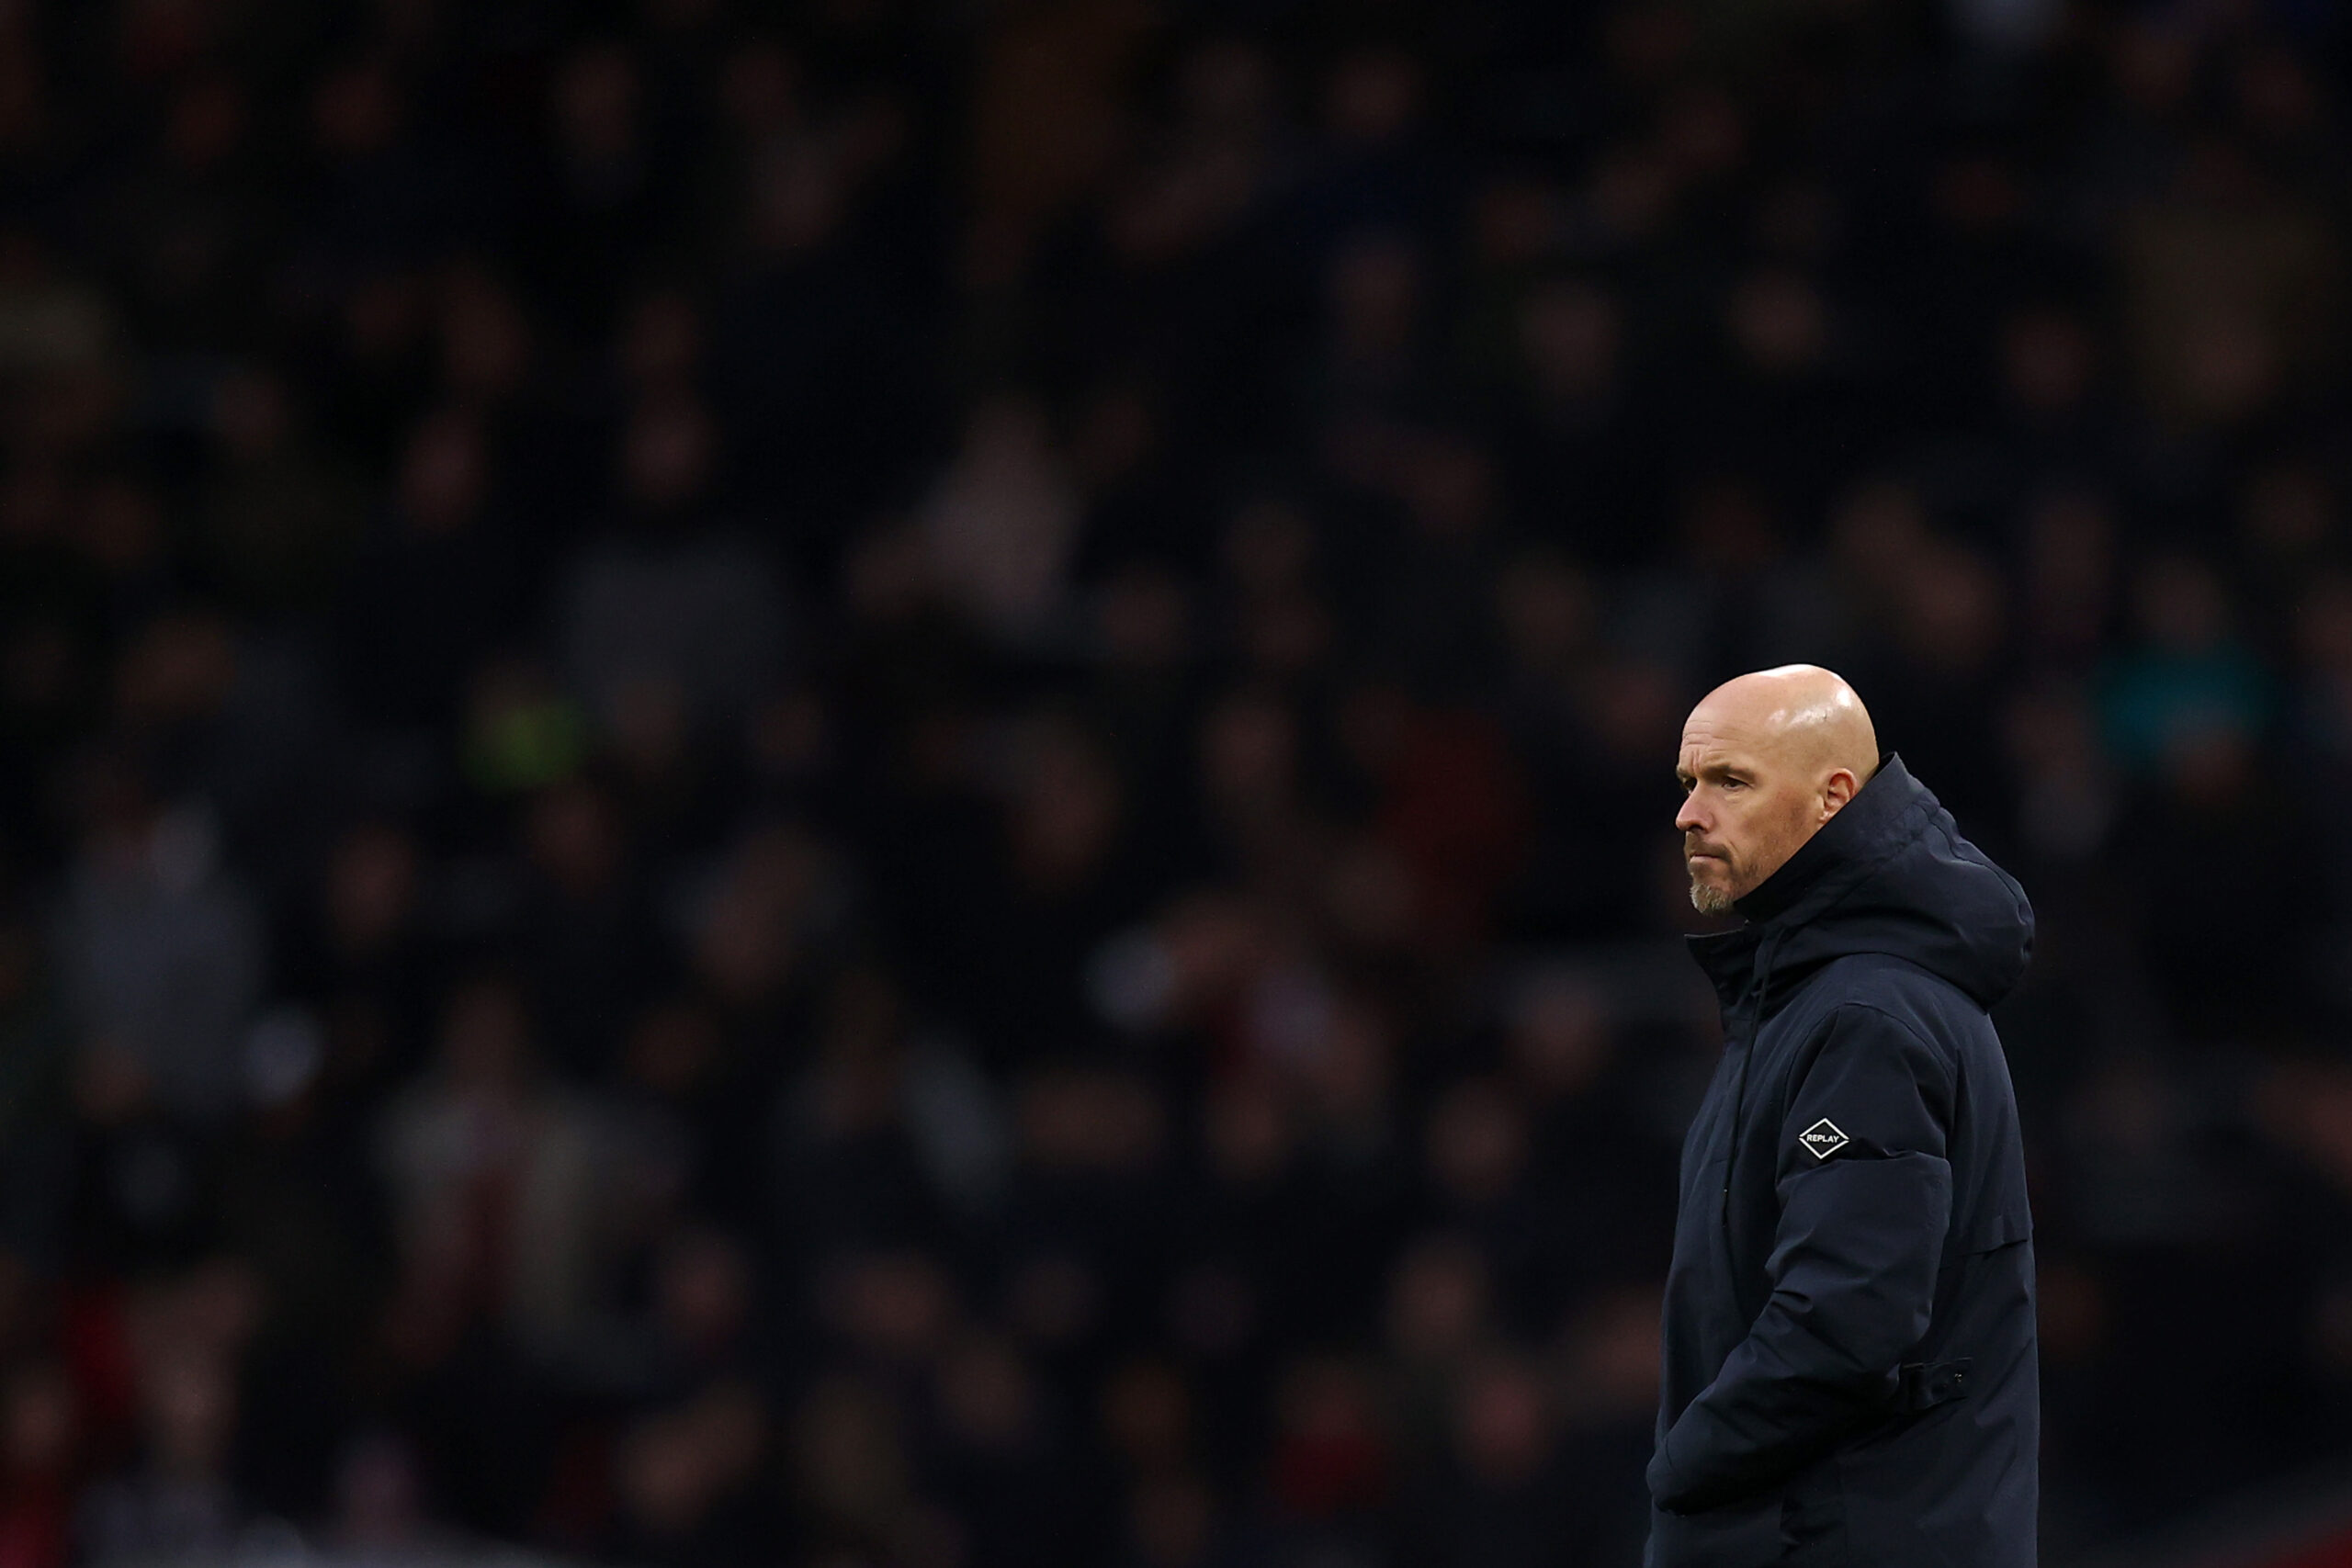 AMSTERDAM, NETHERLANDS - APRIL 09:  AFC Ajax Head Coach / Manager, Erik ten Hag looks on during the Dutch Eredivisie match between Ajax Amsterdam and Sparta Rotterdam at Johan Cruijff Arena on April 09, 2022 in Amsterdam, Netherlands. (Photo by Dean Mouhtaropoulos/Getty Images)